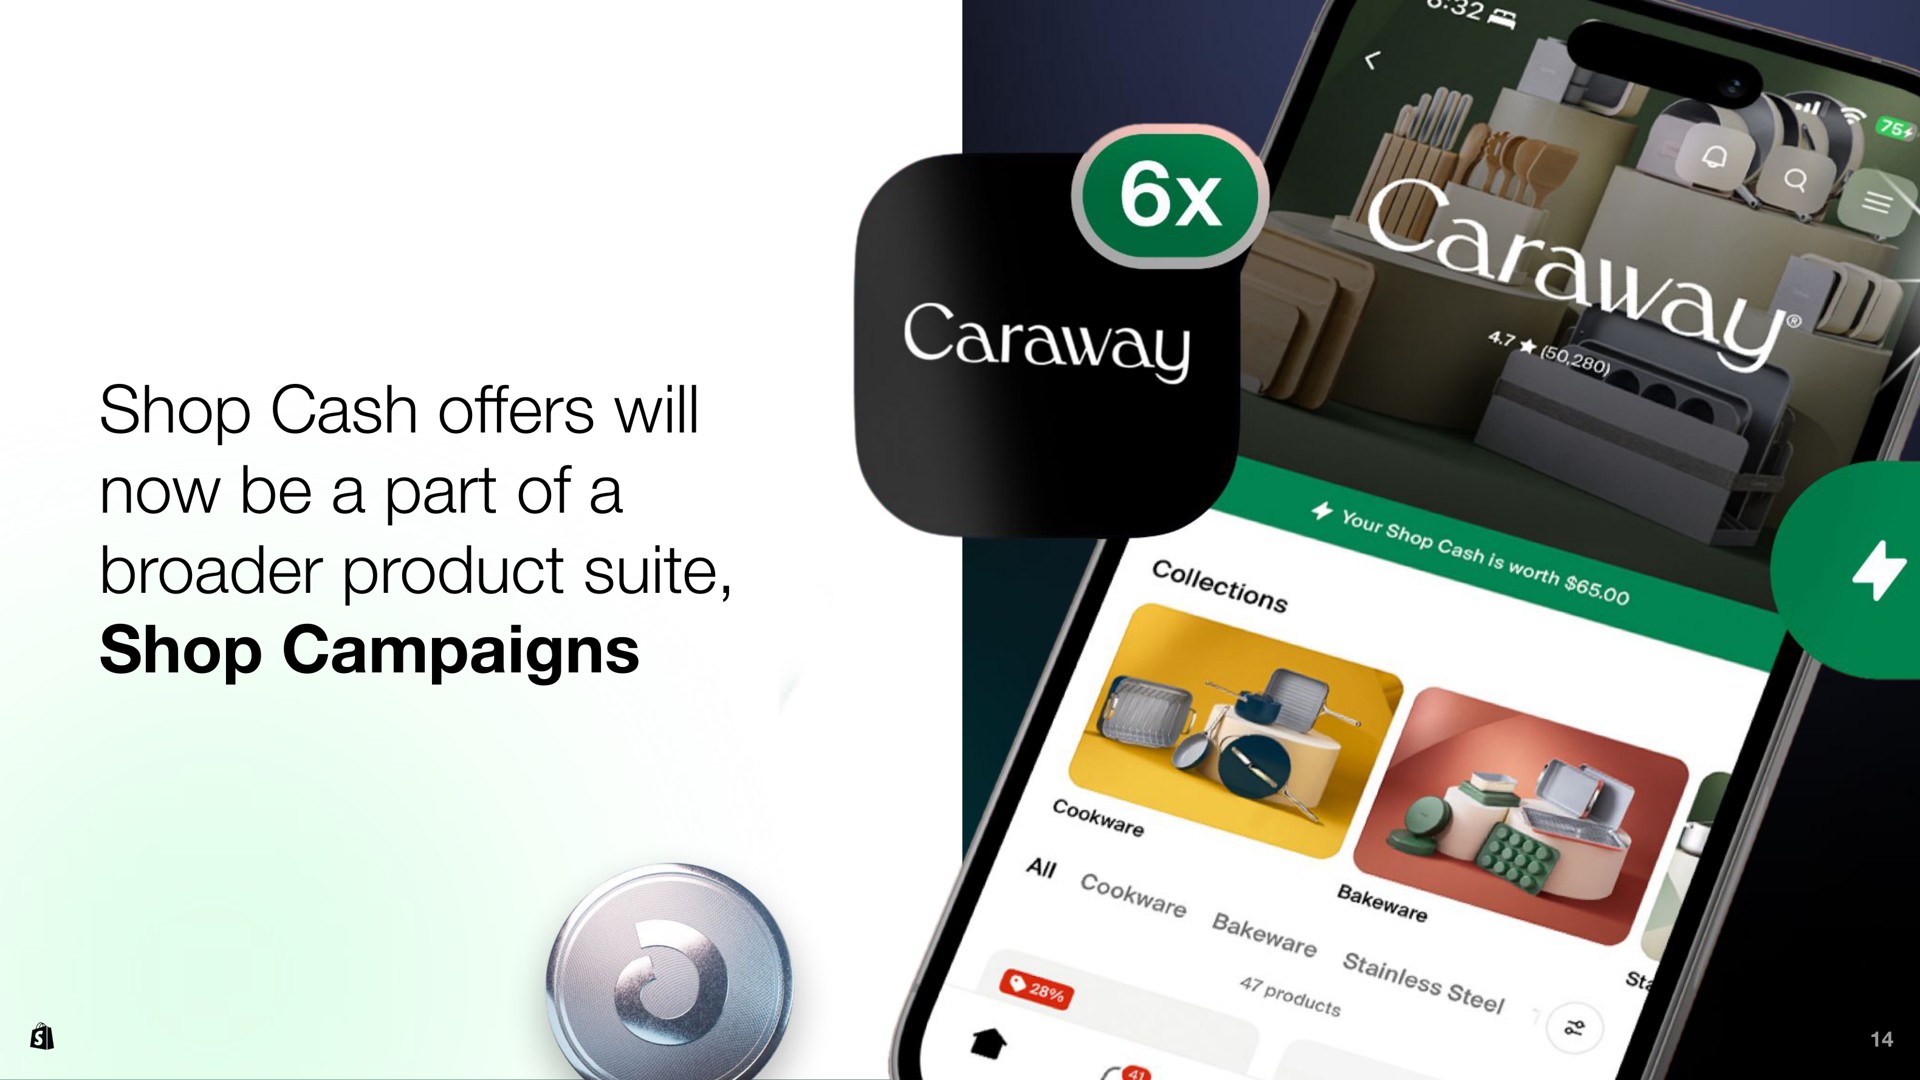 shop cash ers will now be a part of a product suite shop campaigns offers | Shopify